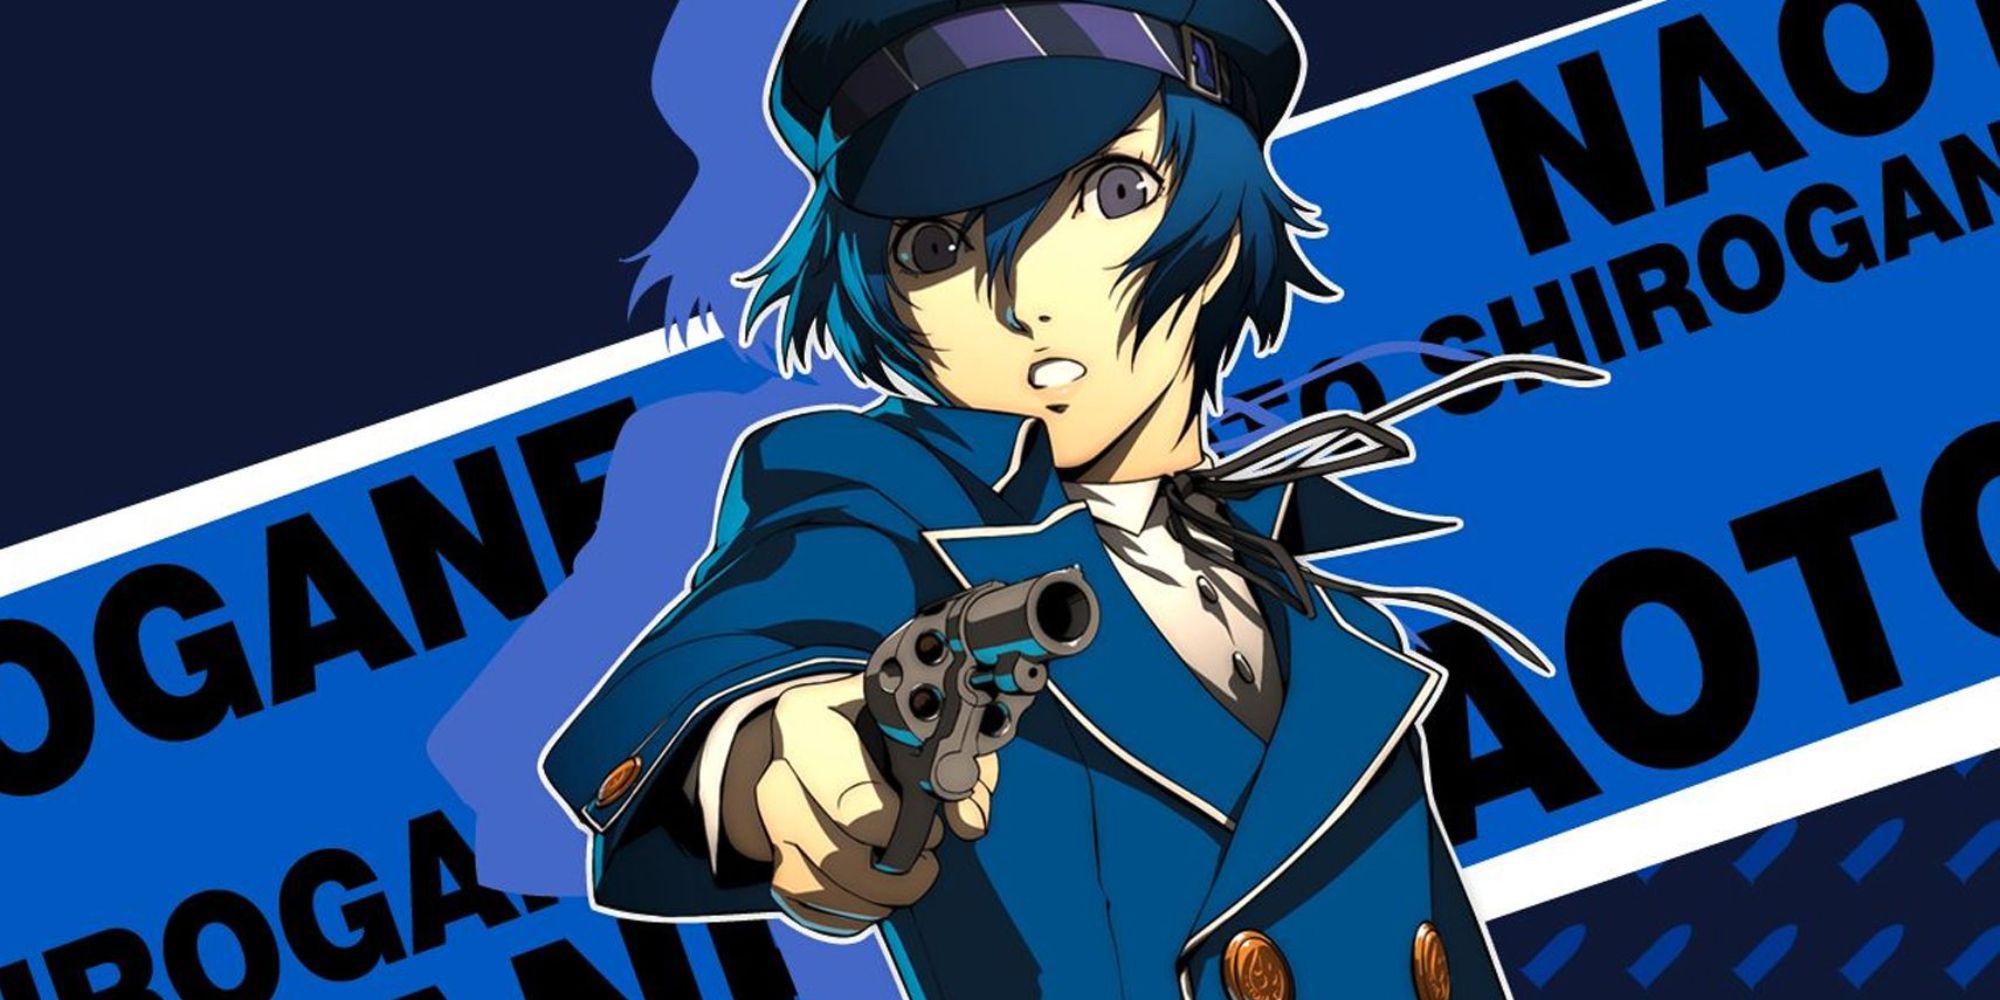 character art for Naoto Shirogane showing her holding a pistol up to the viewer in distress